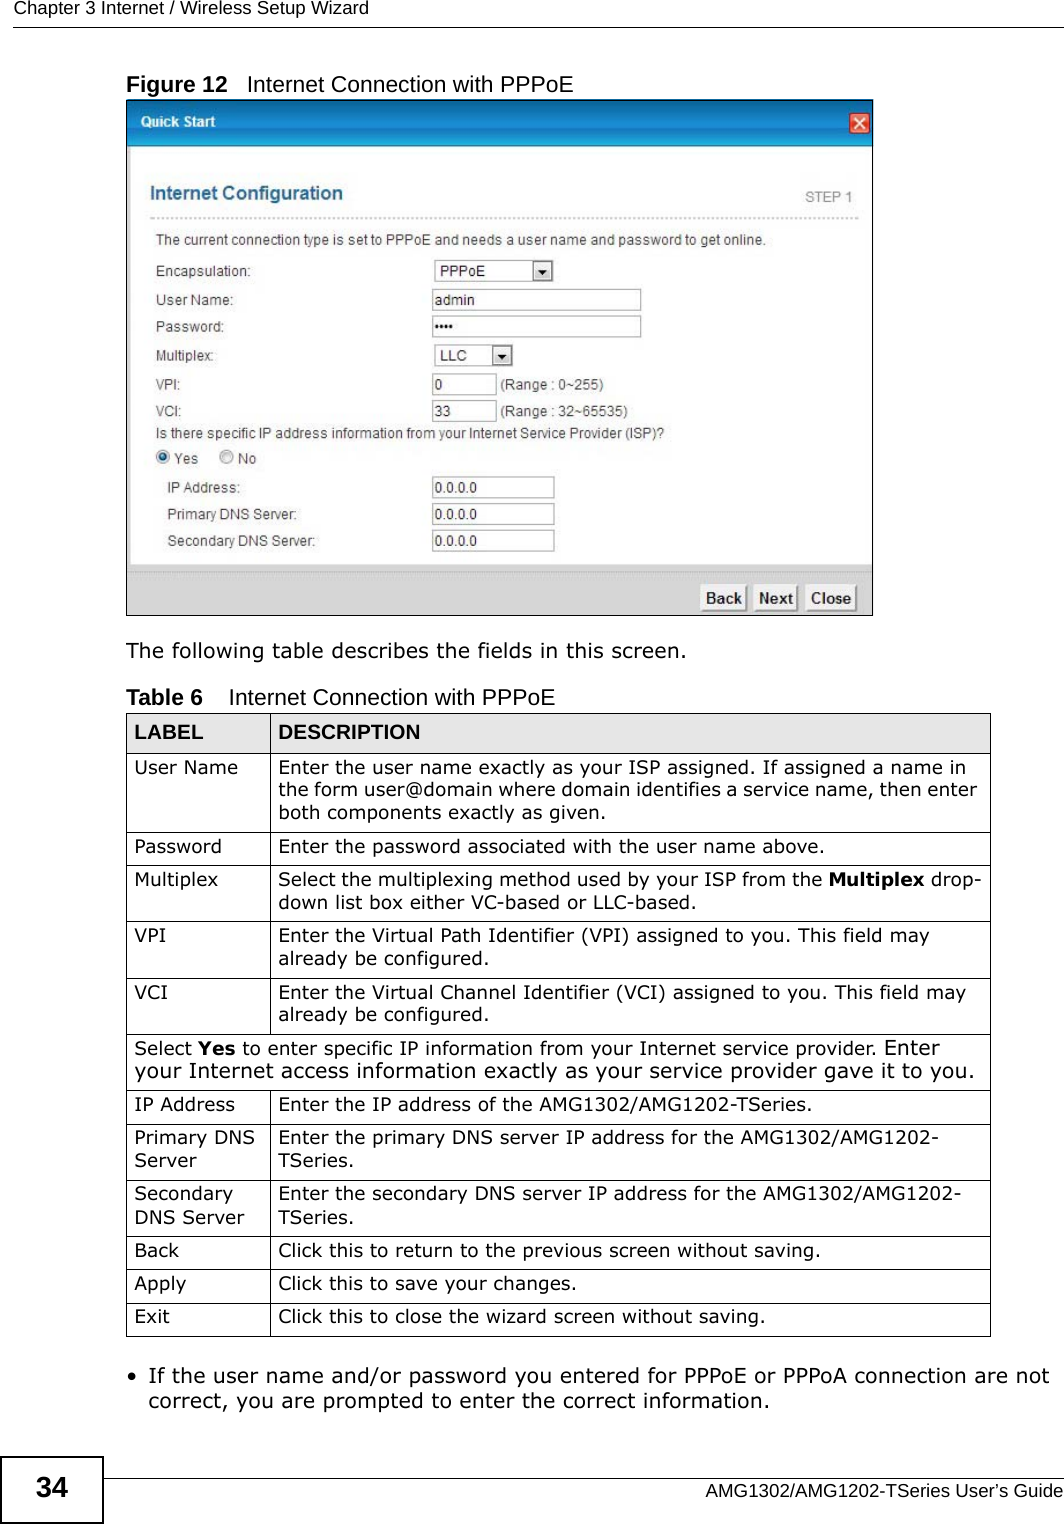 Chapter 3 Internet / Wireless Setup WizardAMG1302/AMG1202-TSeries User’s Guide34Figure 12   Internet Connection with PPPoEThe following table describes the fields in this screen.• If the user name and/or password you entered for PPPoE or PPPoA connection are not correct, you are prompted to enter the correct information.Table 6    Internet Connection with PPPoELABEL DESCRIPTIONUser Name Enter the user name exactly as your ISP assigned. If assigned a name in the form user@domain where domain identifies a service name, then enter both components exactly as given.Password Enter the password associated with the user name above.Multiplex Select the multiplexing method used by your ISP from the Multiplex drop-down list box either VC-based or LLC-based. VPI Enter the Virtual Path Identifier (VPI) assigned to you. This field may already be configured.VCI Enter the Virtual Channel Identifier (VCI) assigned to you. This field may already be configured.Select Yes to enter specific IP information from your Internet service provider. Enter your Internet access information exactly as your service provider gave it to you. IP Address Enter the IP address of the AMG1302/AMG1202-TSeries. Primary DNS ServerEnter the primary DNS server IP address for the AMG1302/AMG1202-TSeries.Secondary DNS ServerEnter the secondary DNS server IP address for the AMG1302/AMG1202-TSeries.Back Click this to return to the previous screen without saving.Apply Click this to save your changes. Exit Click this to close the wizard screen without saving.